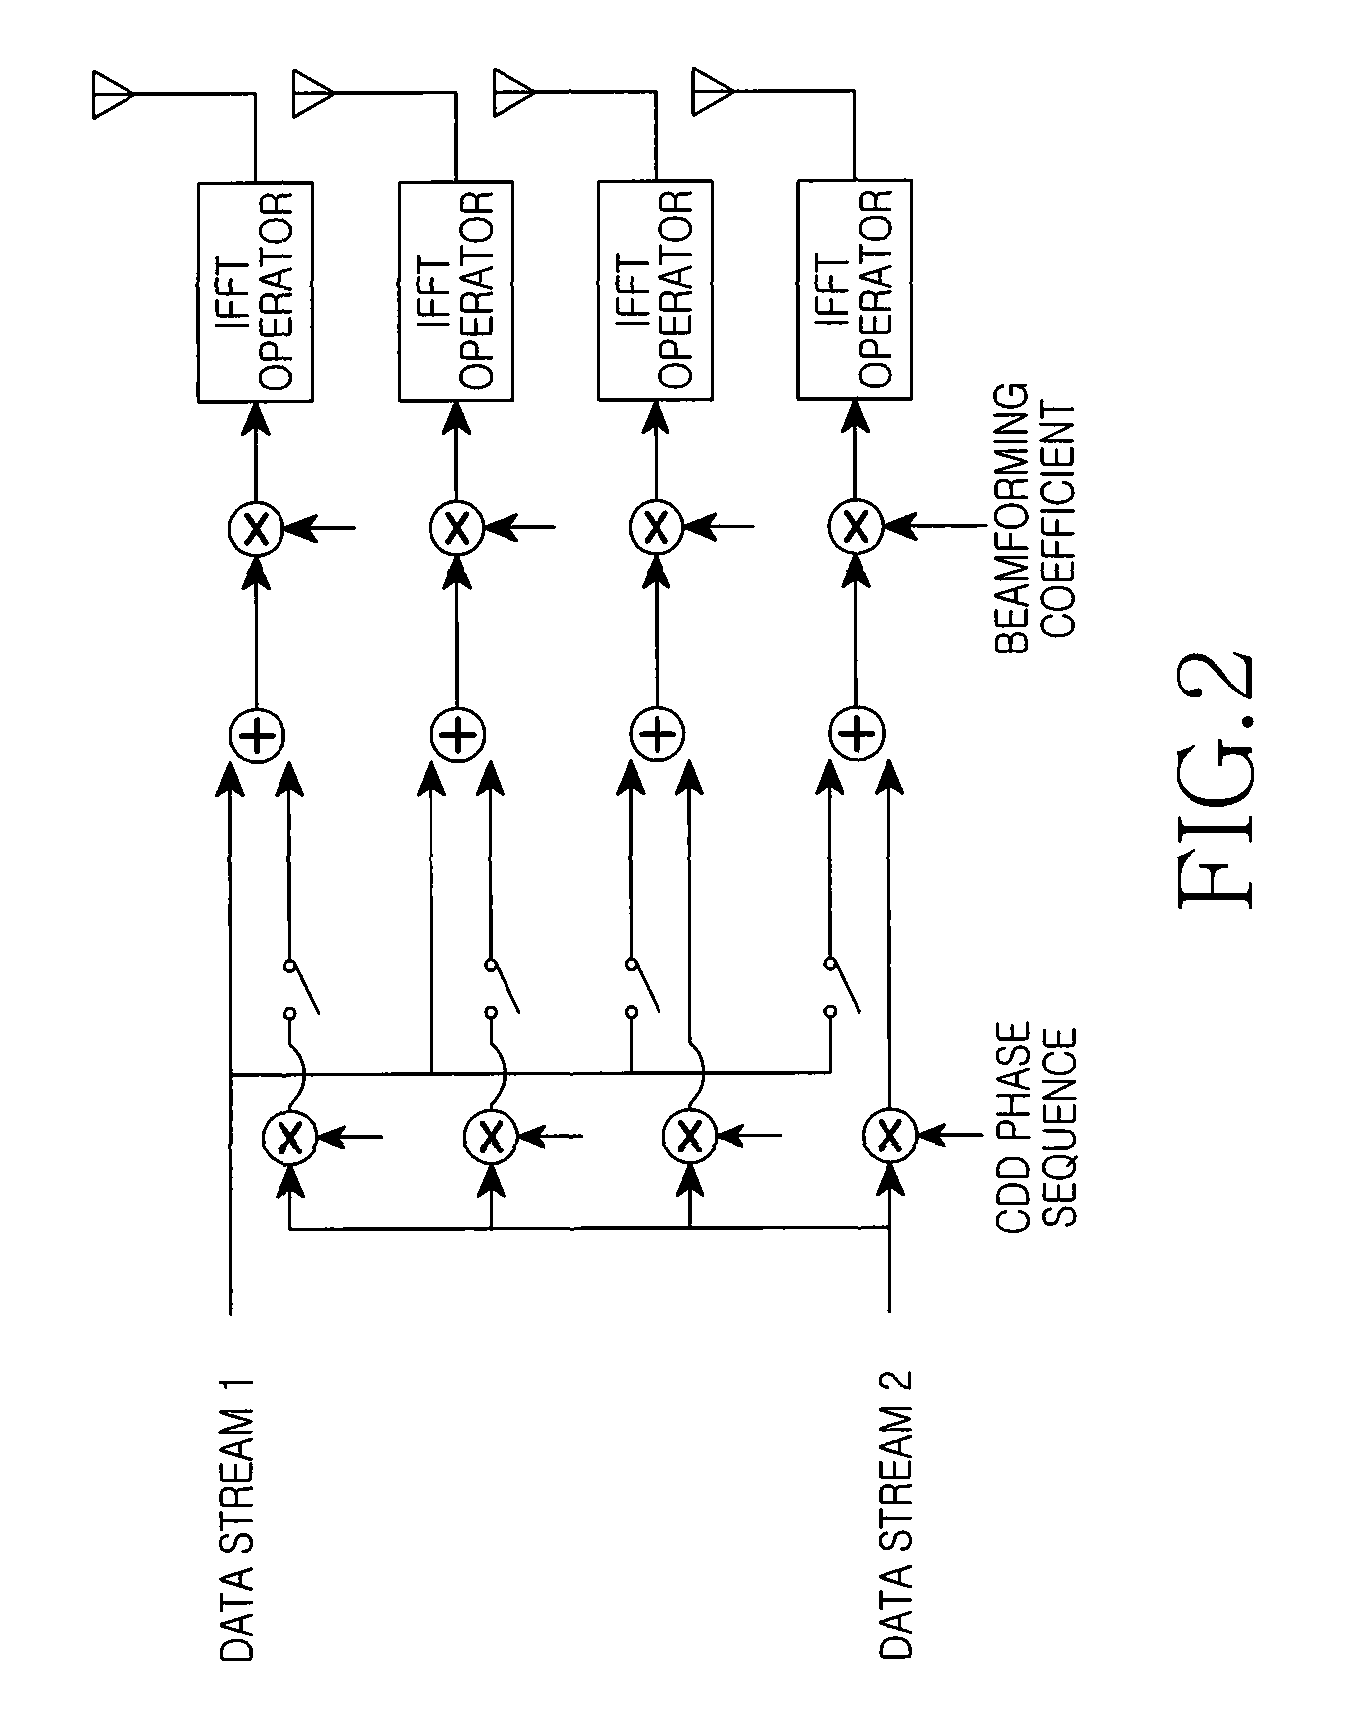 Apparatus and method for supporting multiple-input multiple-output and beamforming simultaneously in wireless communication system